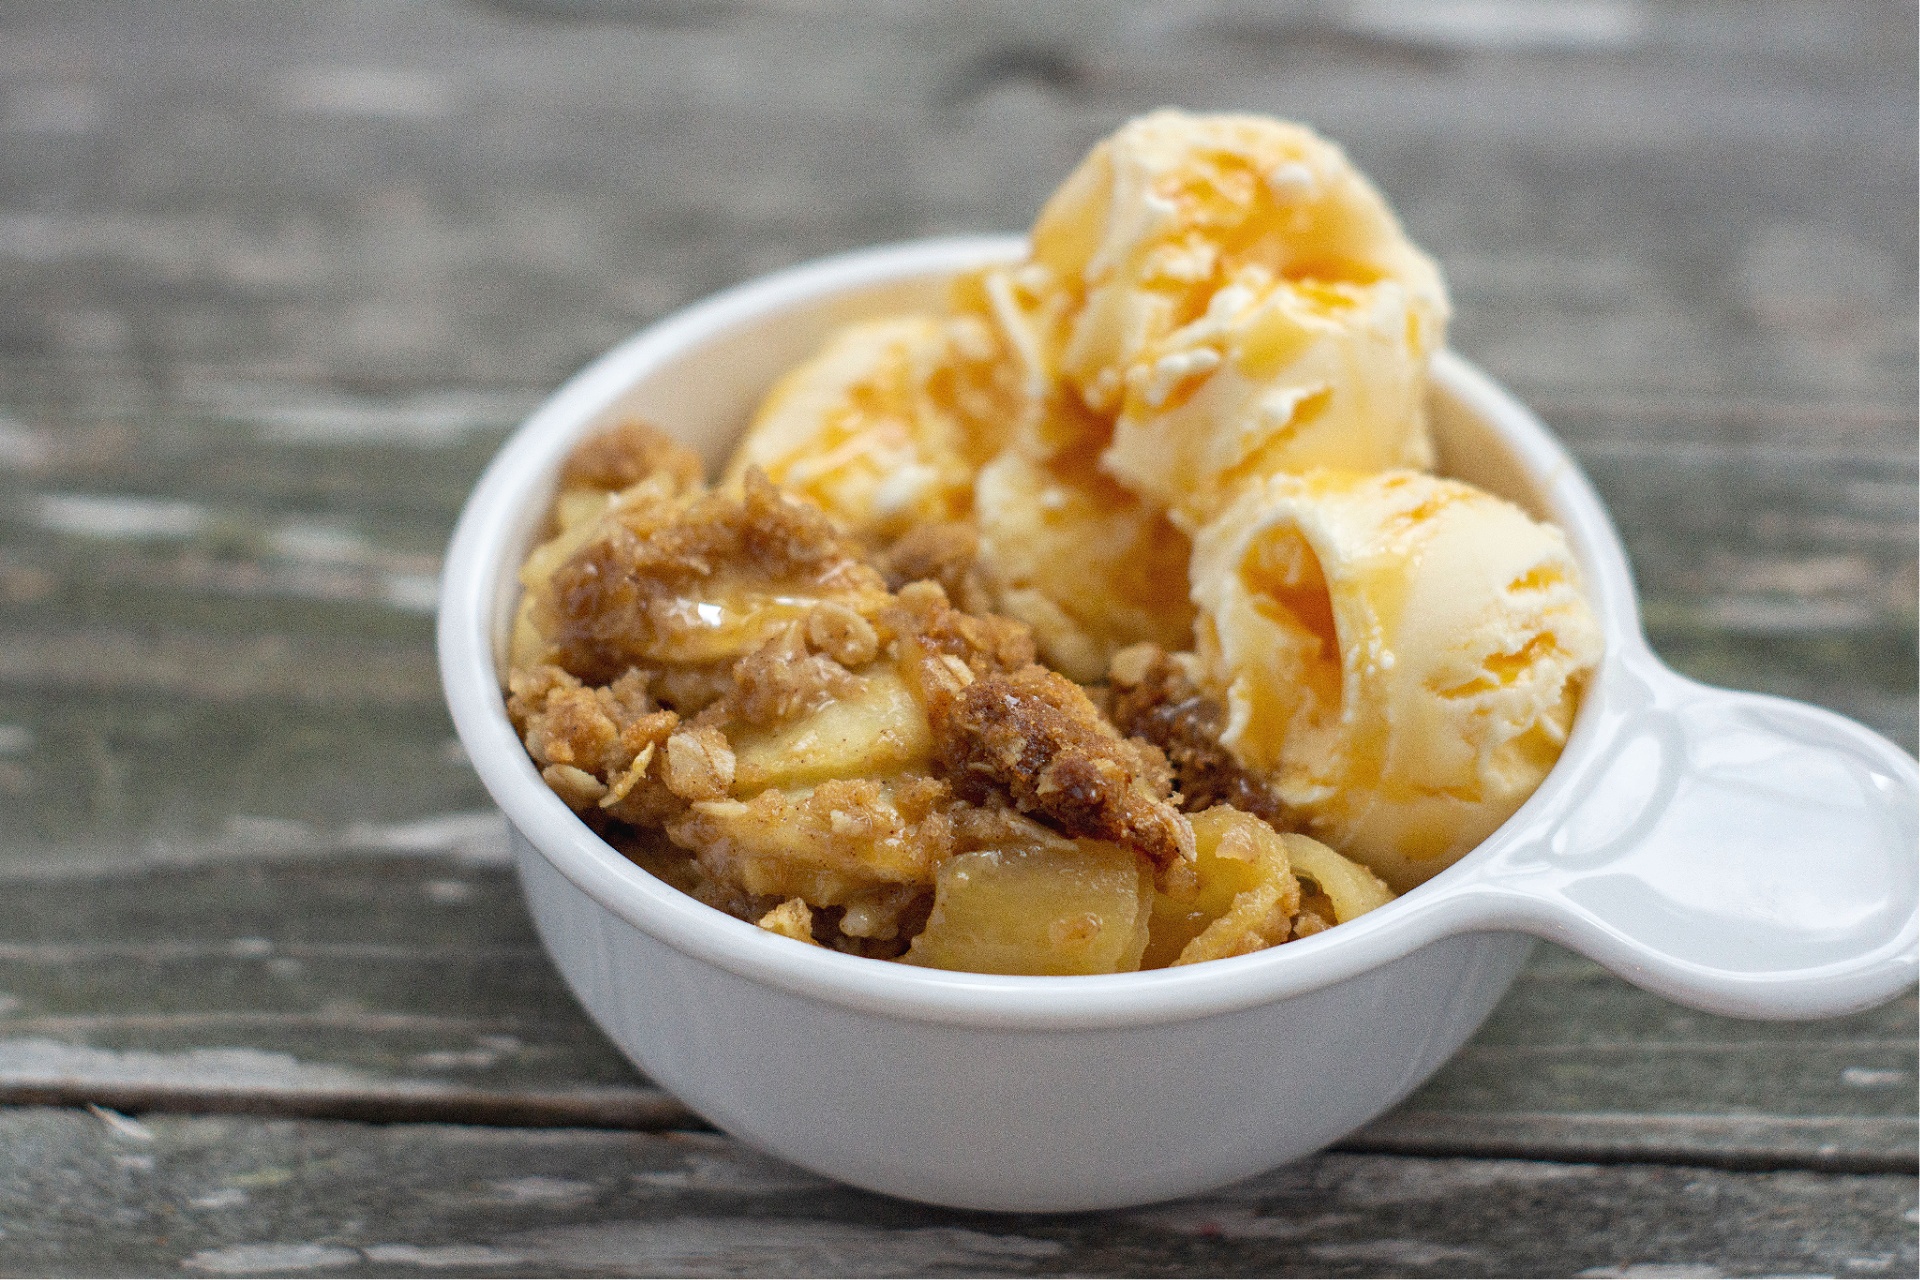 Tasty Old Fashioned Apple Crisp with Oats